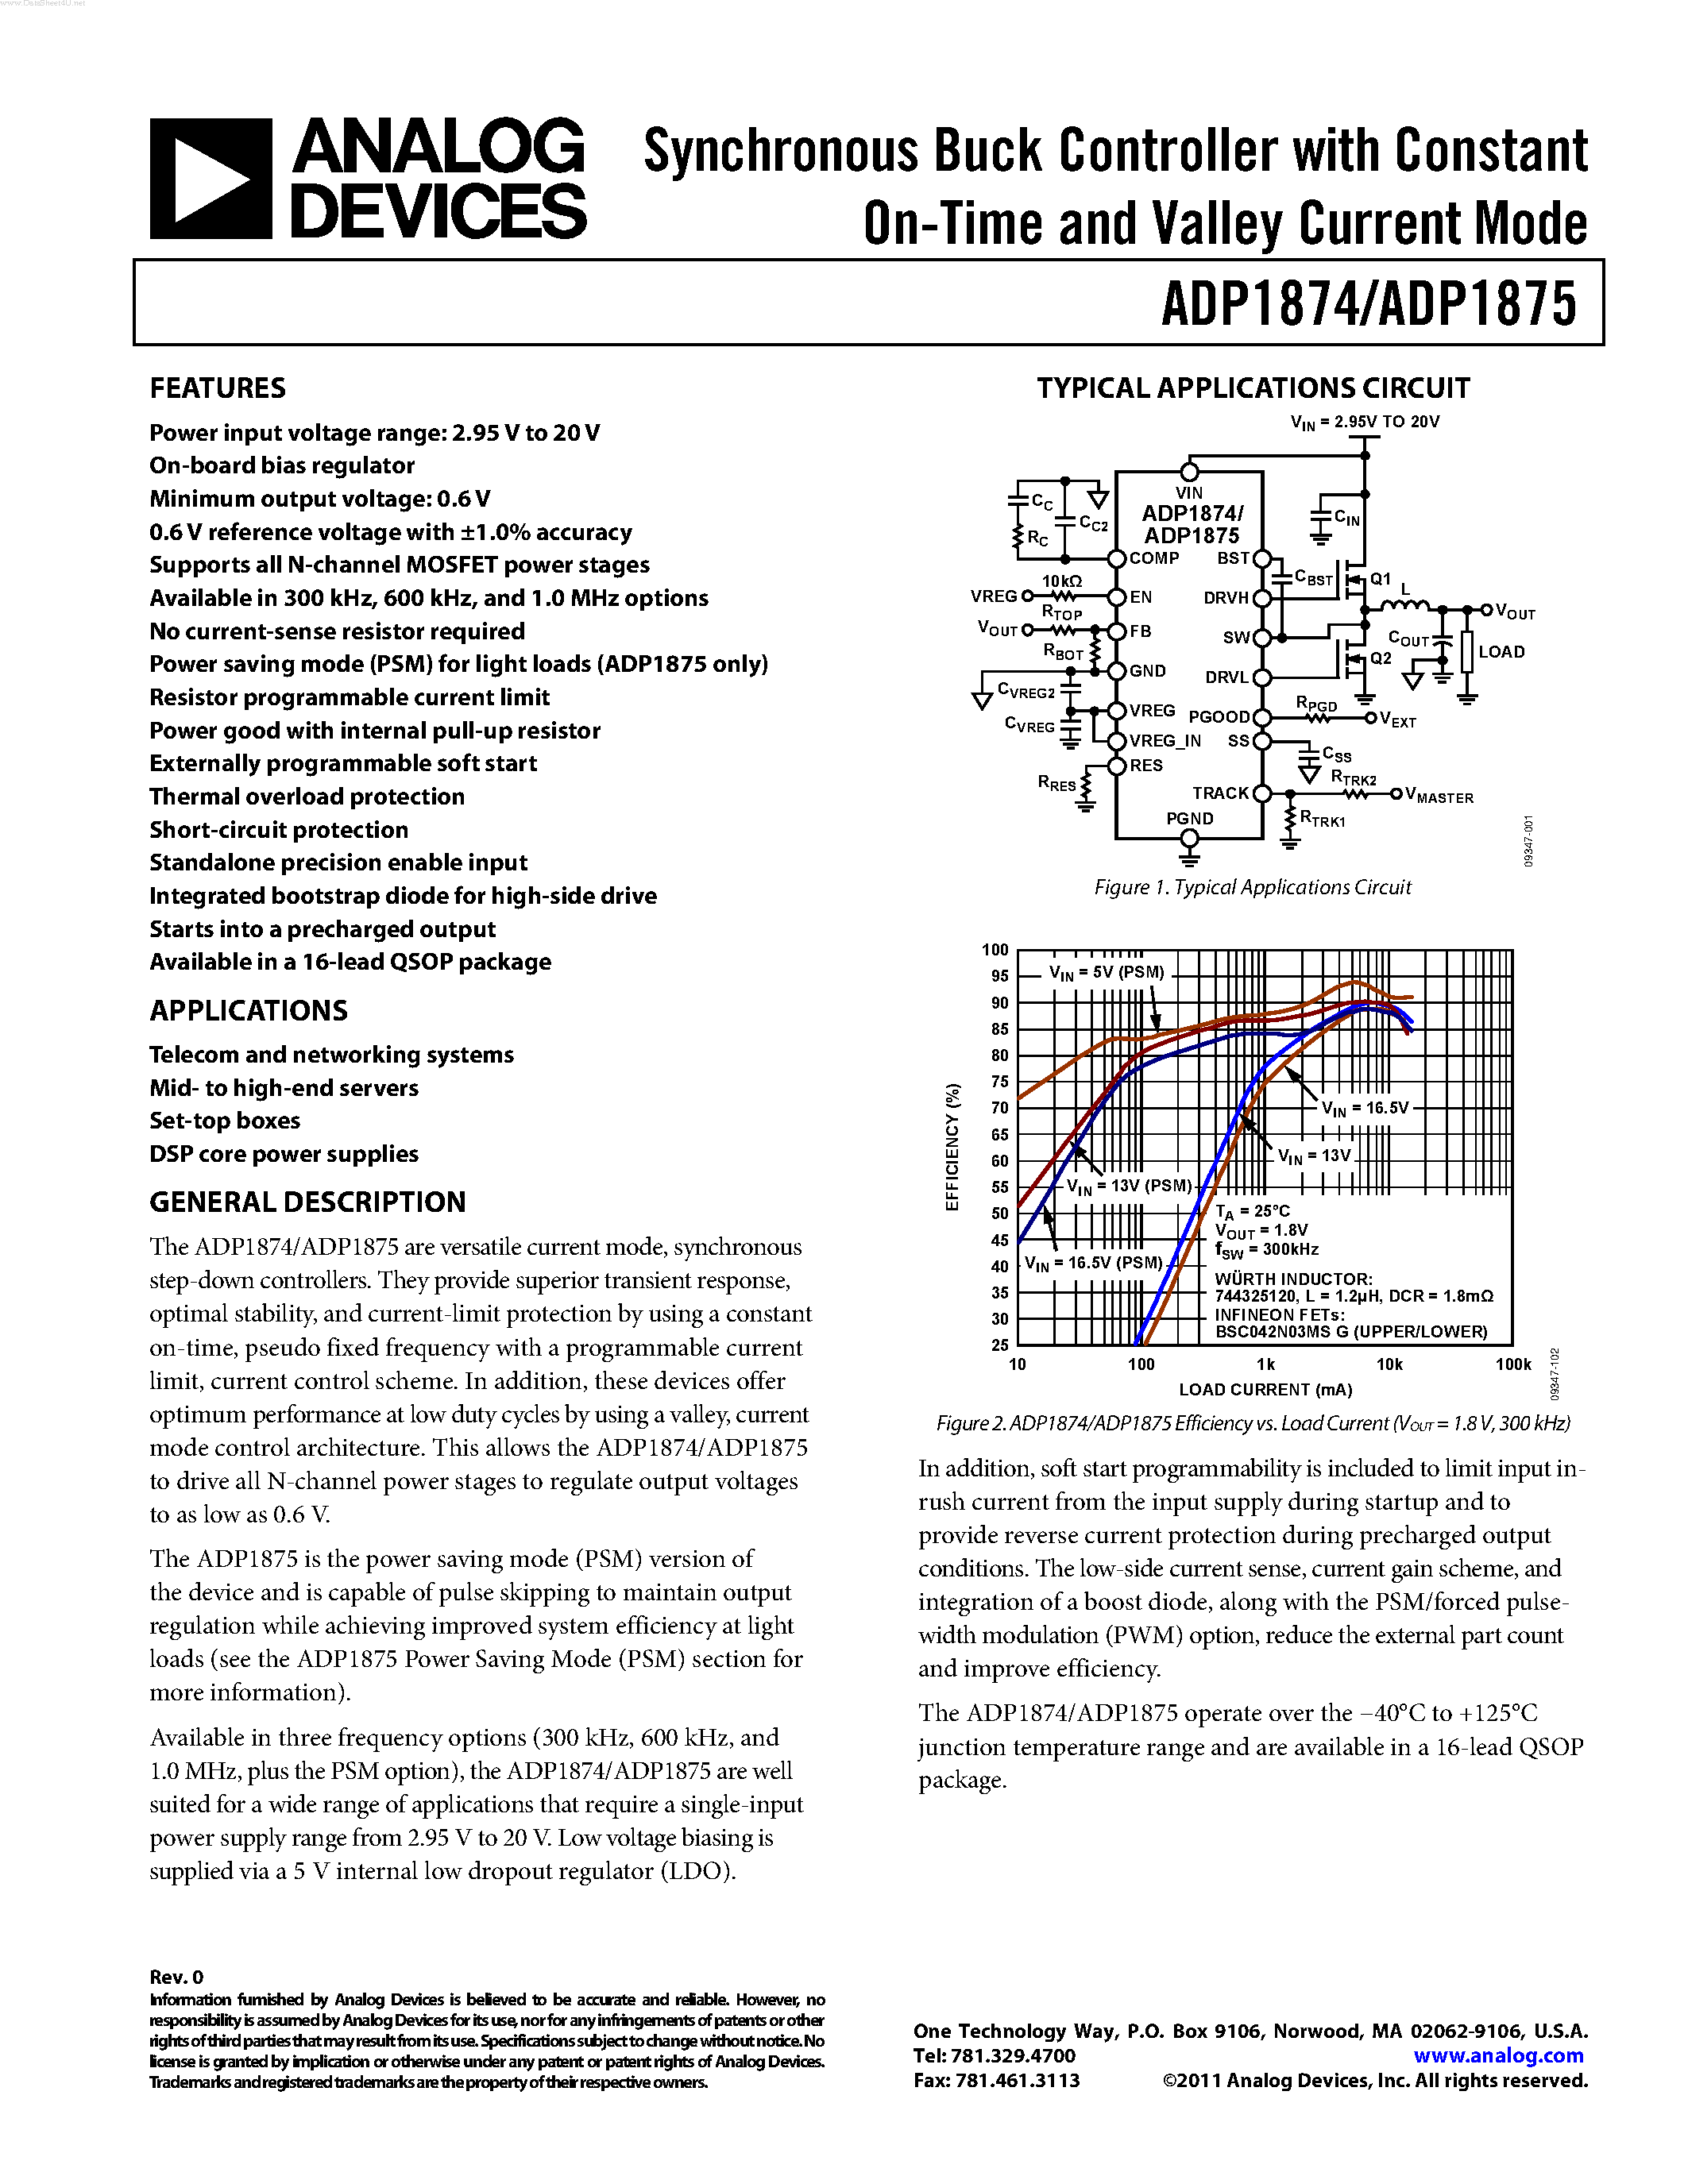 Datasheet ADP1874 - (ADP1874 / ADP1875) Synchronous Buck Controller page 1